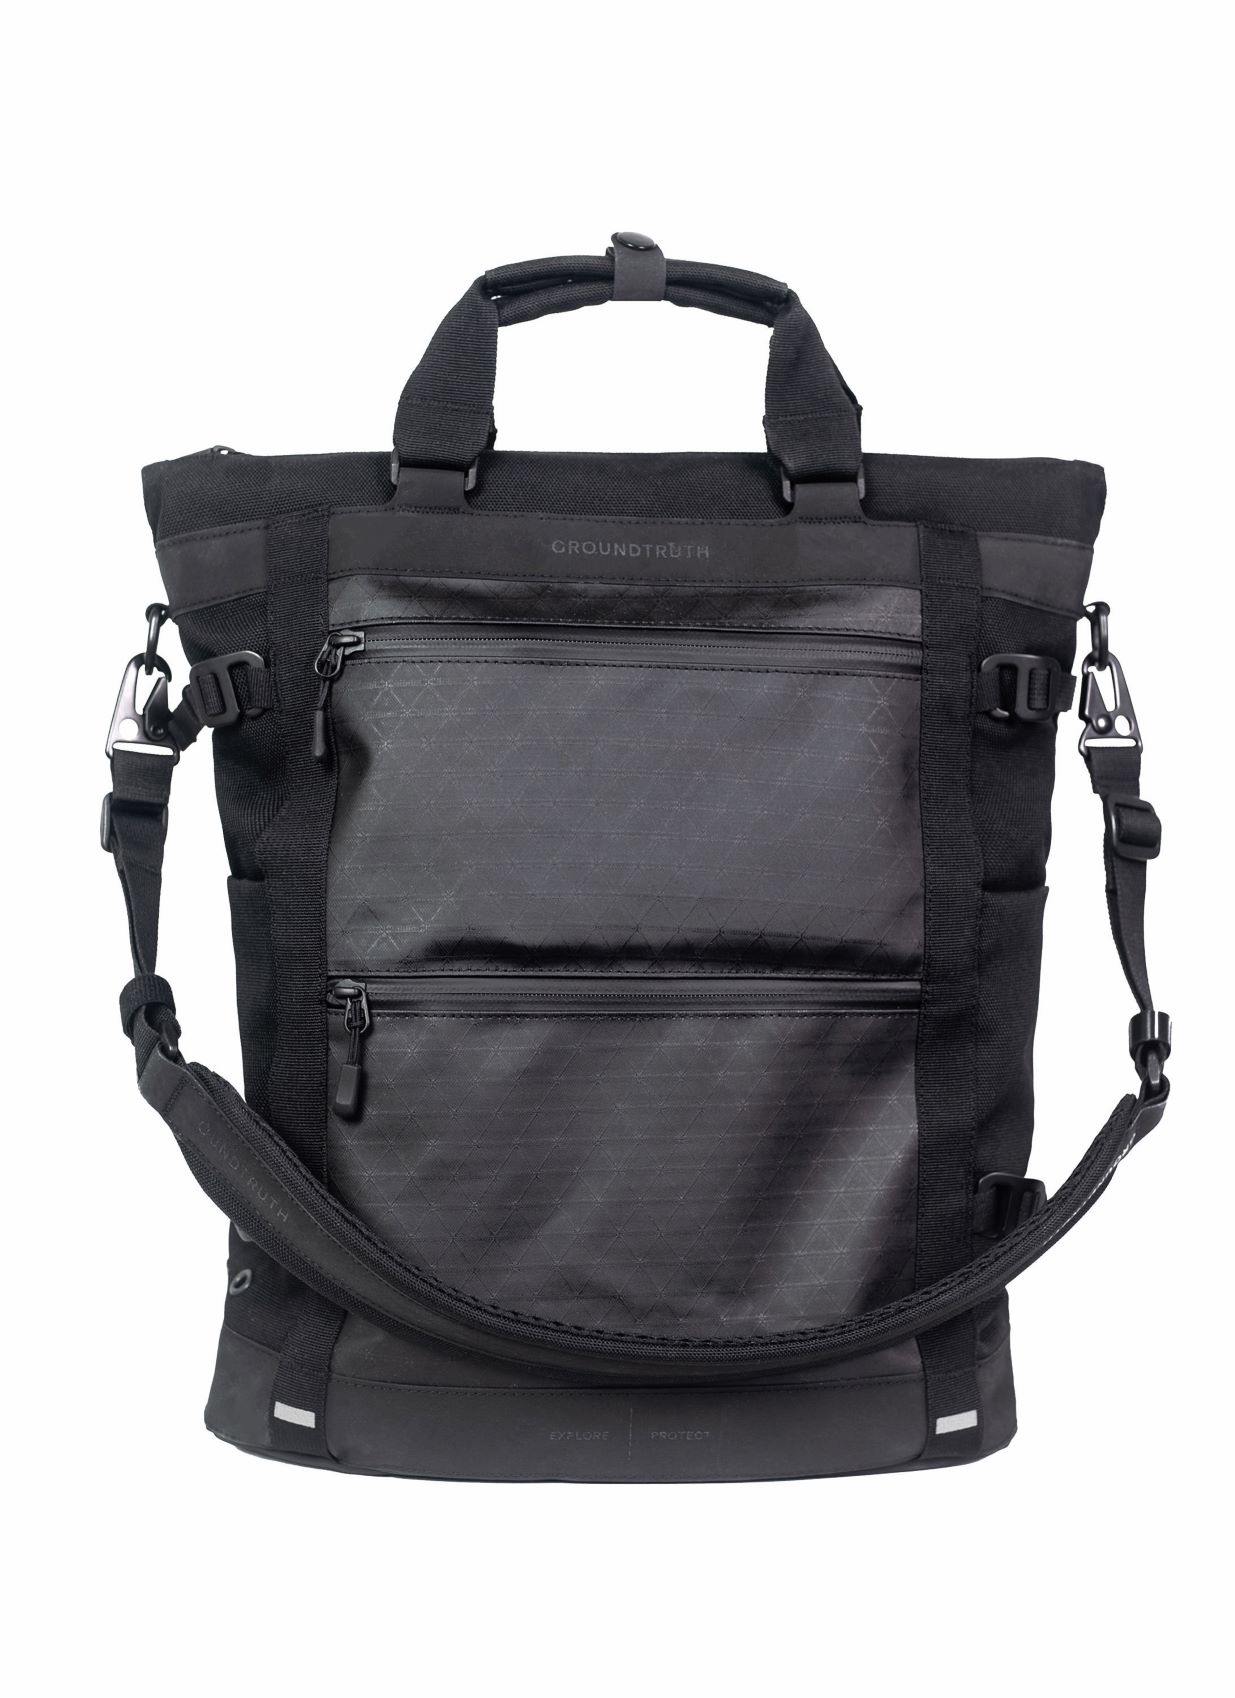 groundtruth sports backpack